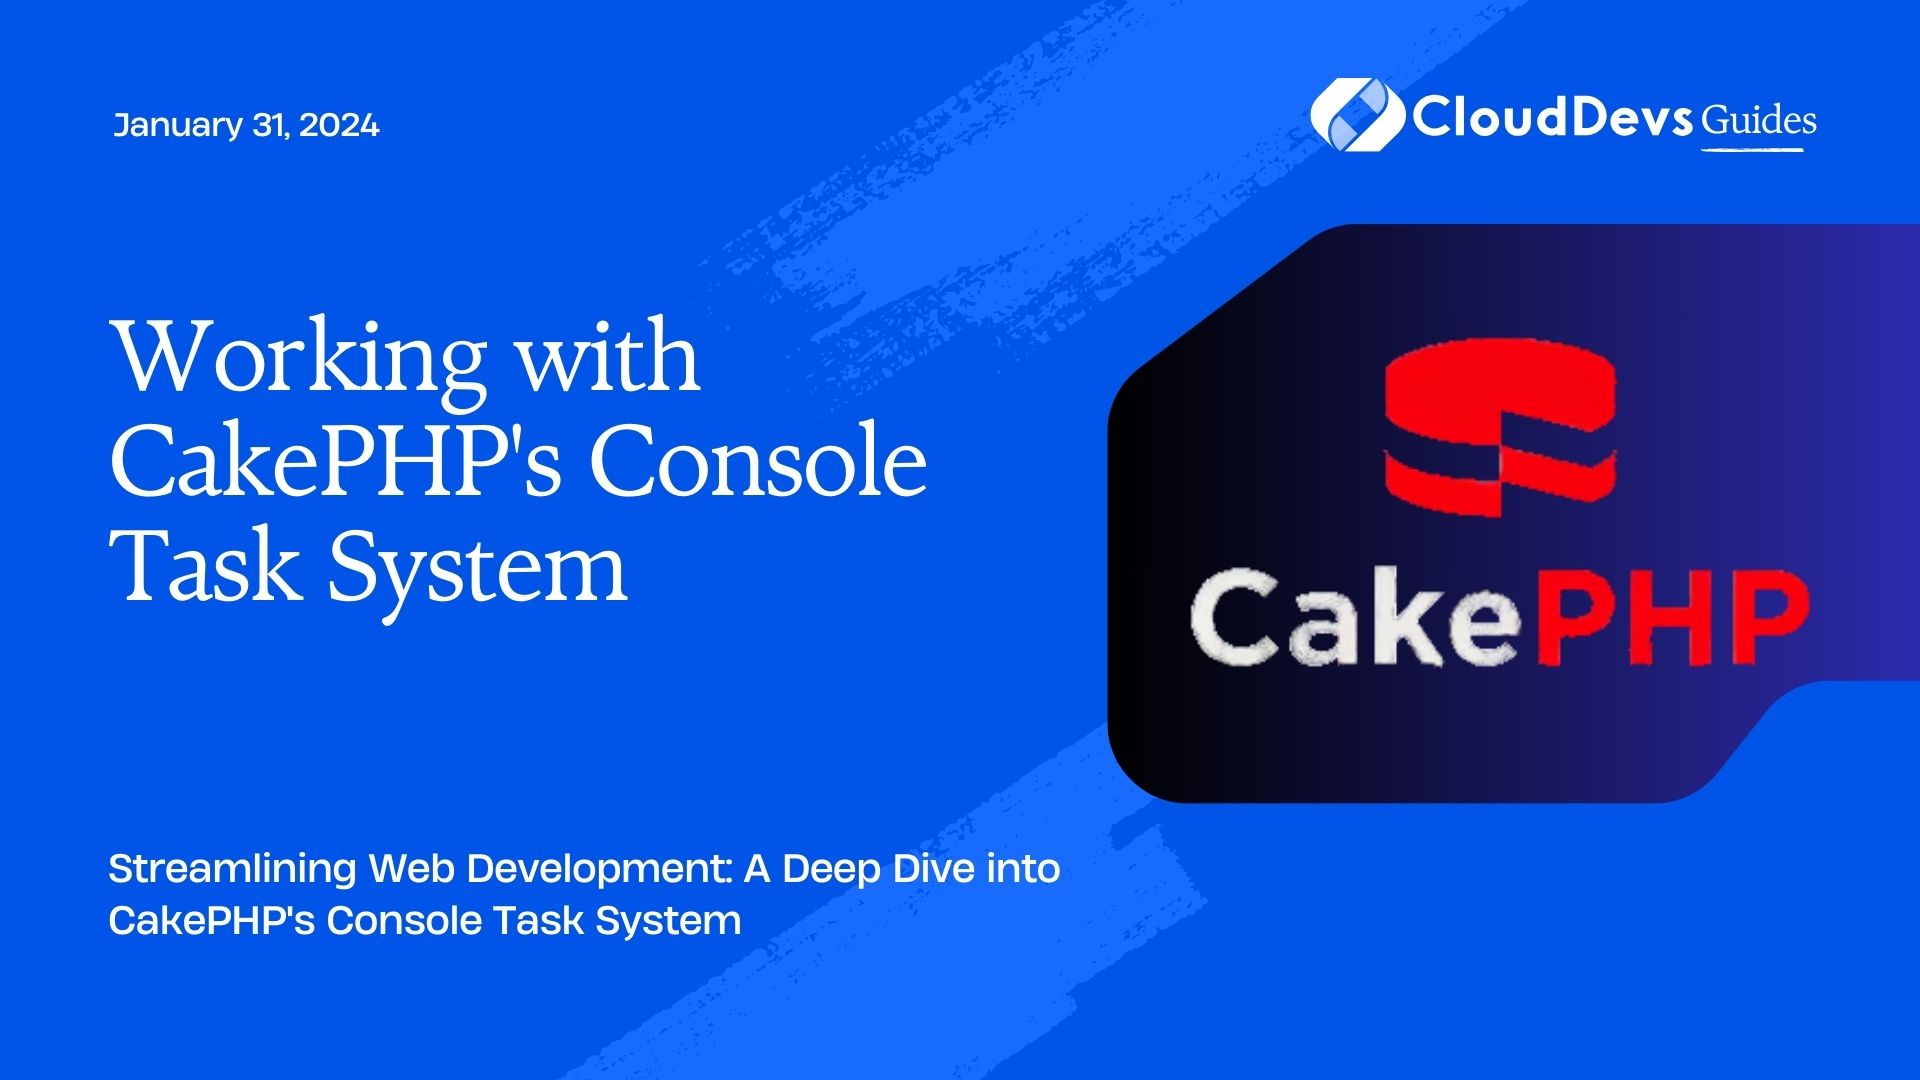 Working with CakePHP's Console Task System